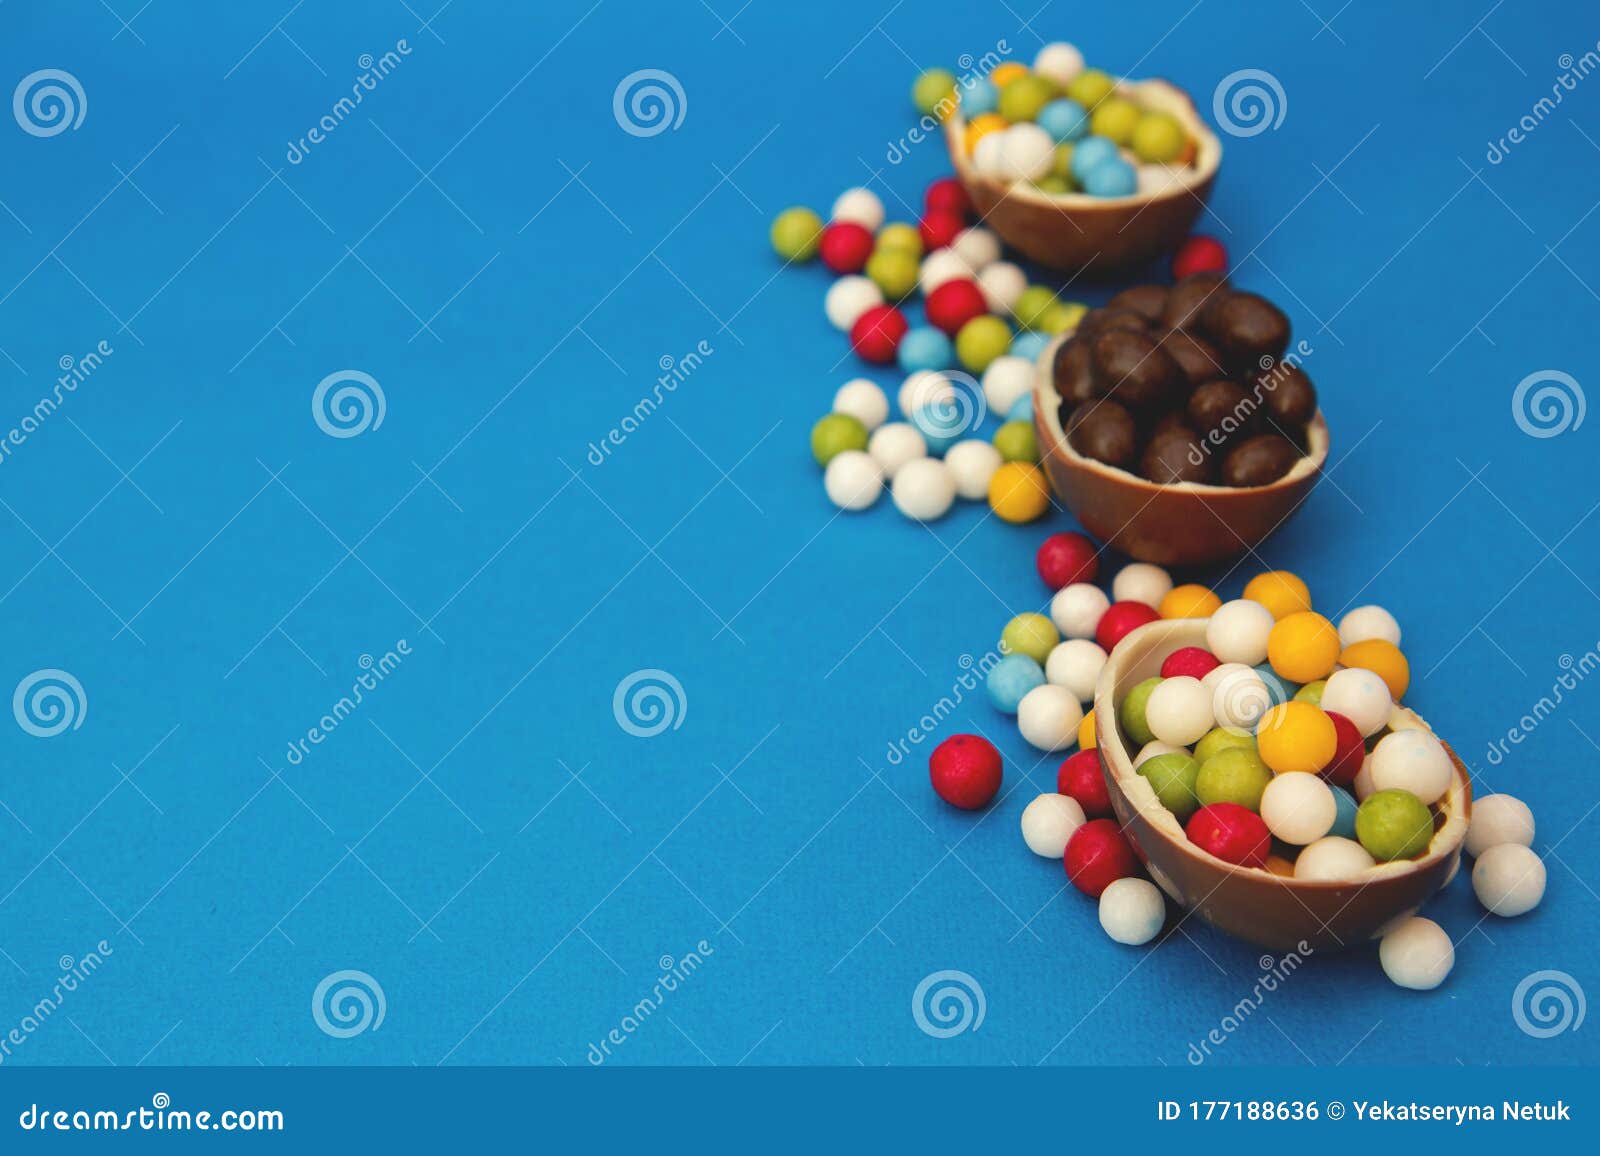 broken chocolate easter eggs and strew colored sweets on blue background